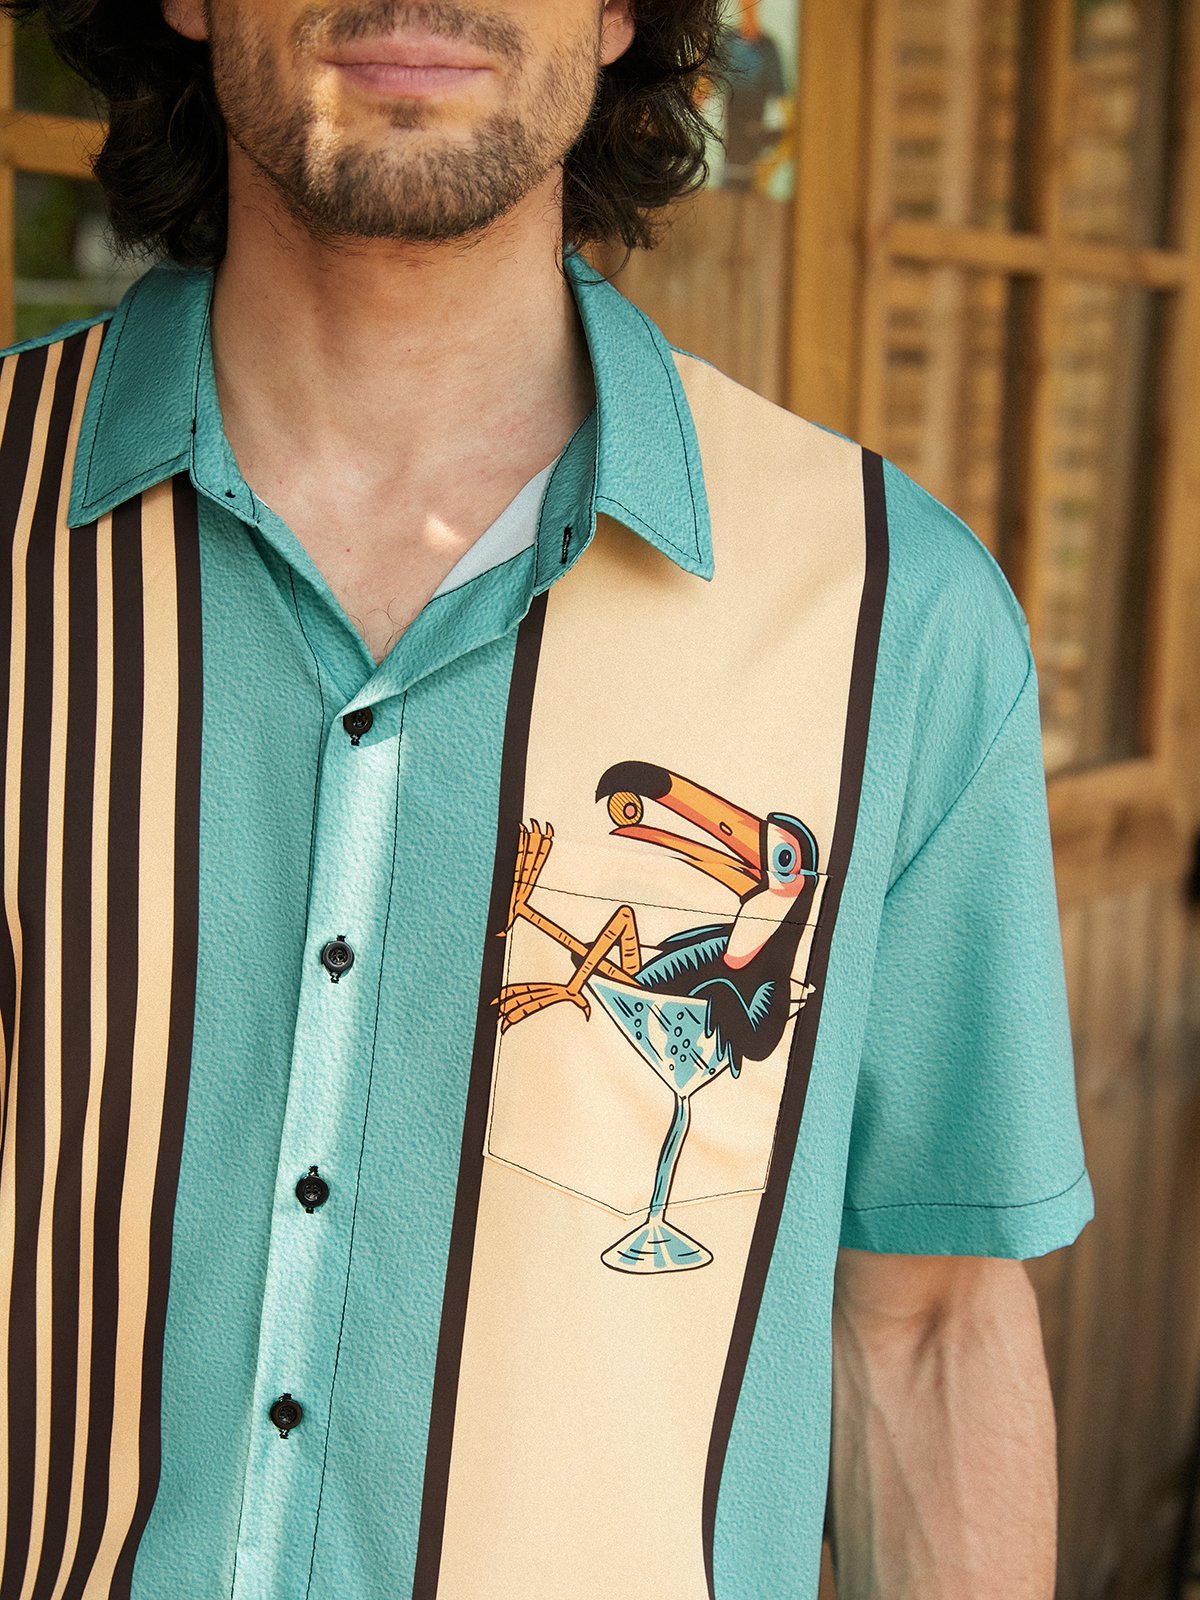 Hardaddy X Artist Funny Button Down Shirts Animal Toucans Chest Pocket Short Sleeve Vintage Bowling Shirt